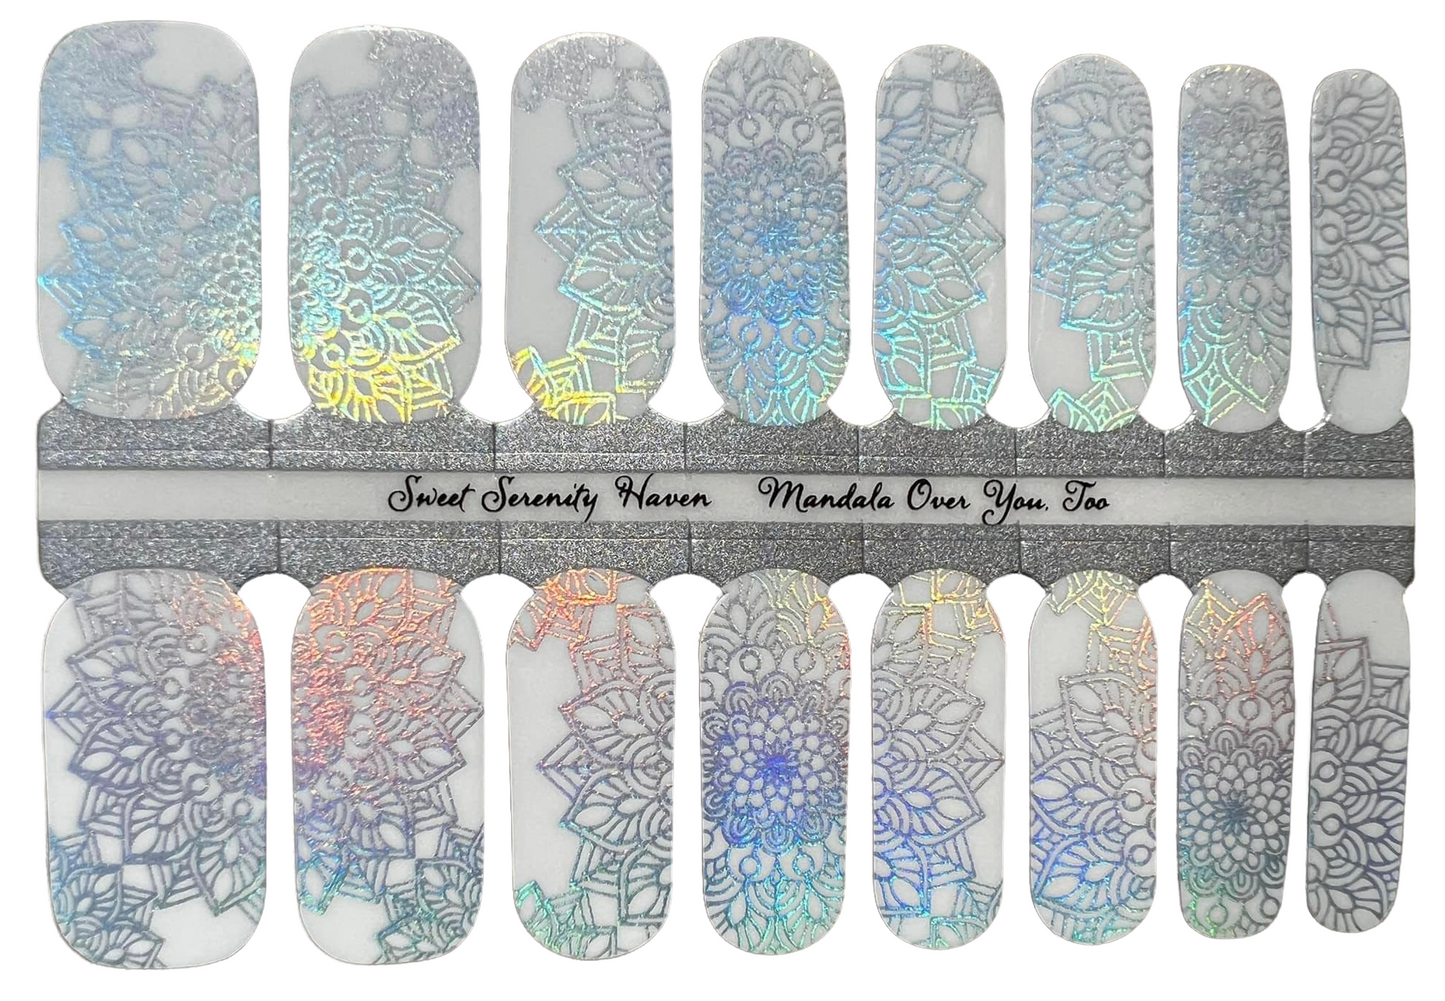 Mandala Over You Too - Exclusive SSH Limited Edition